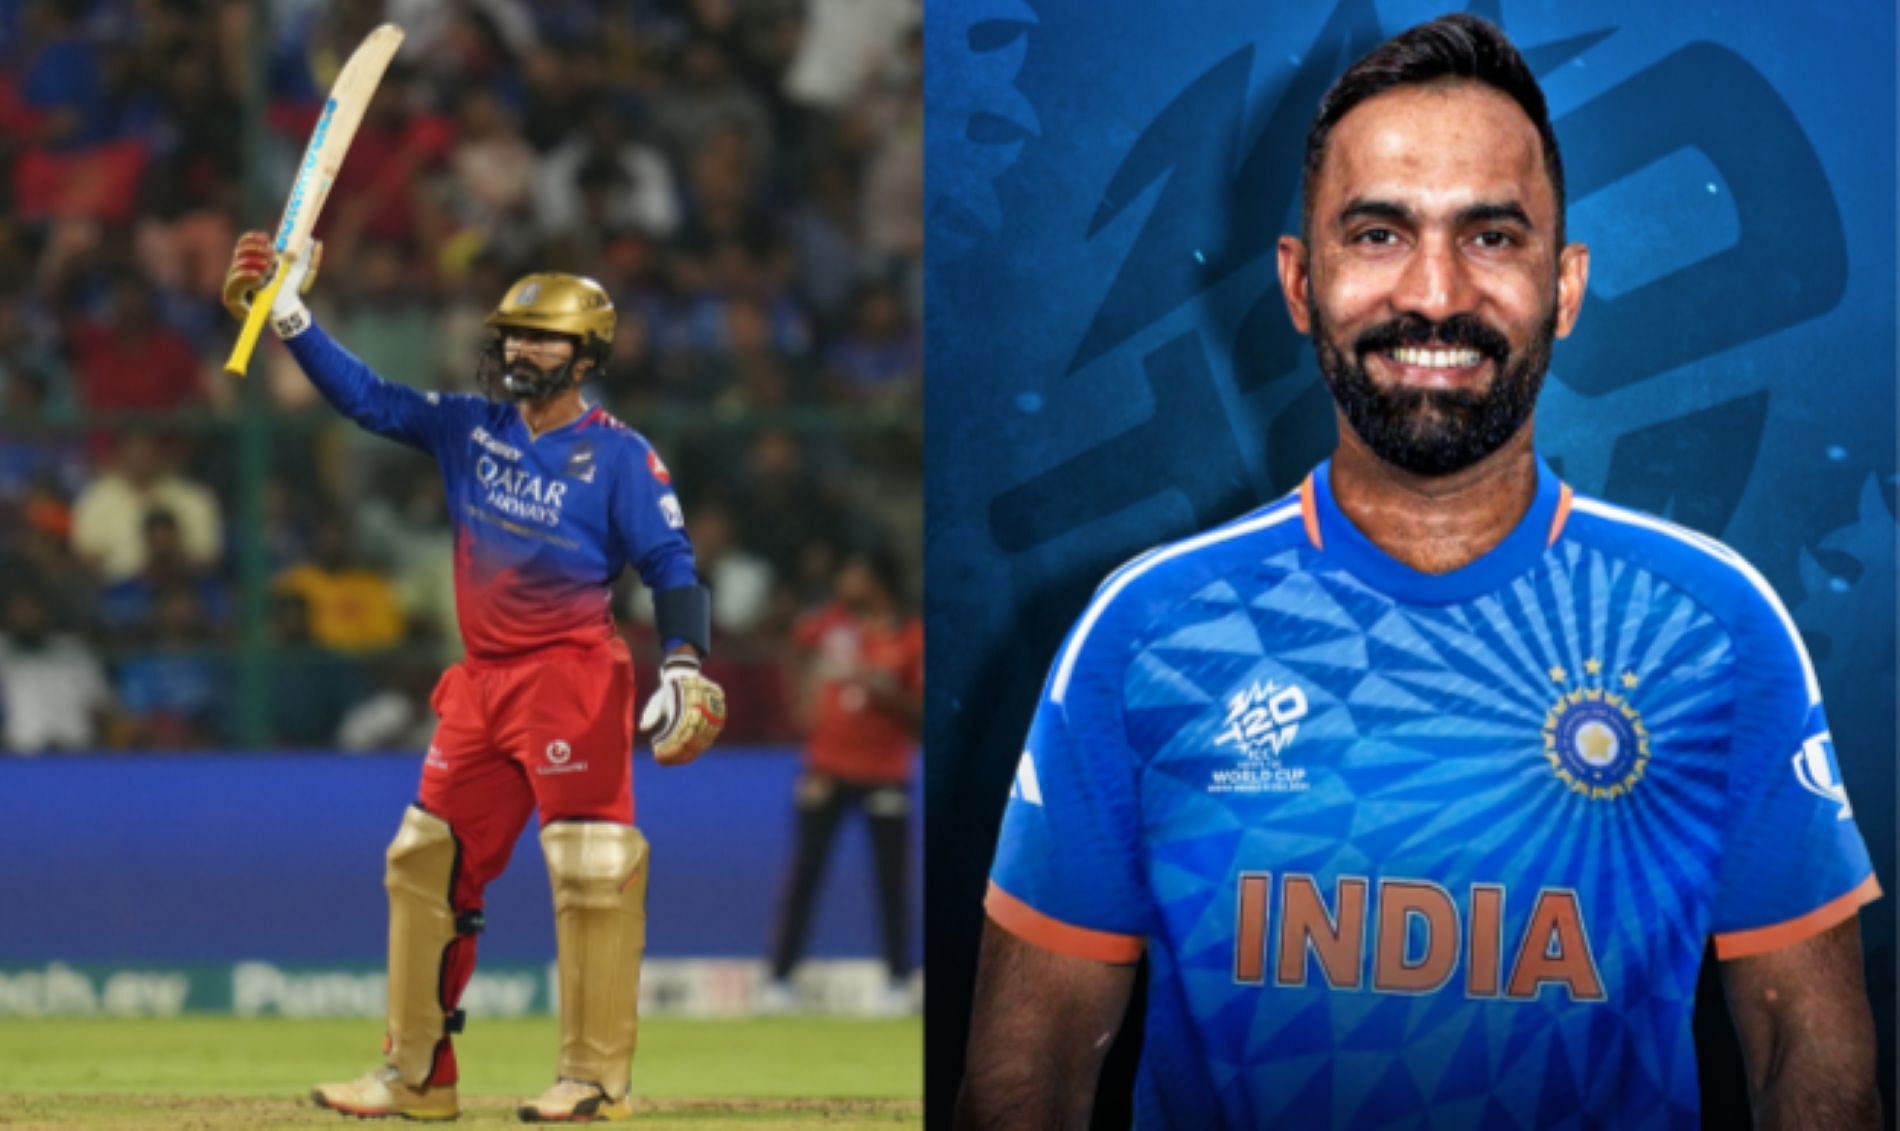 Leg and off: Should India pick Dinesh Karthik for the T20 World Cup?